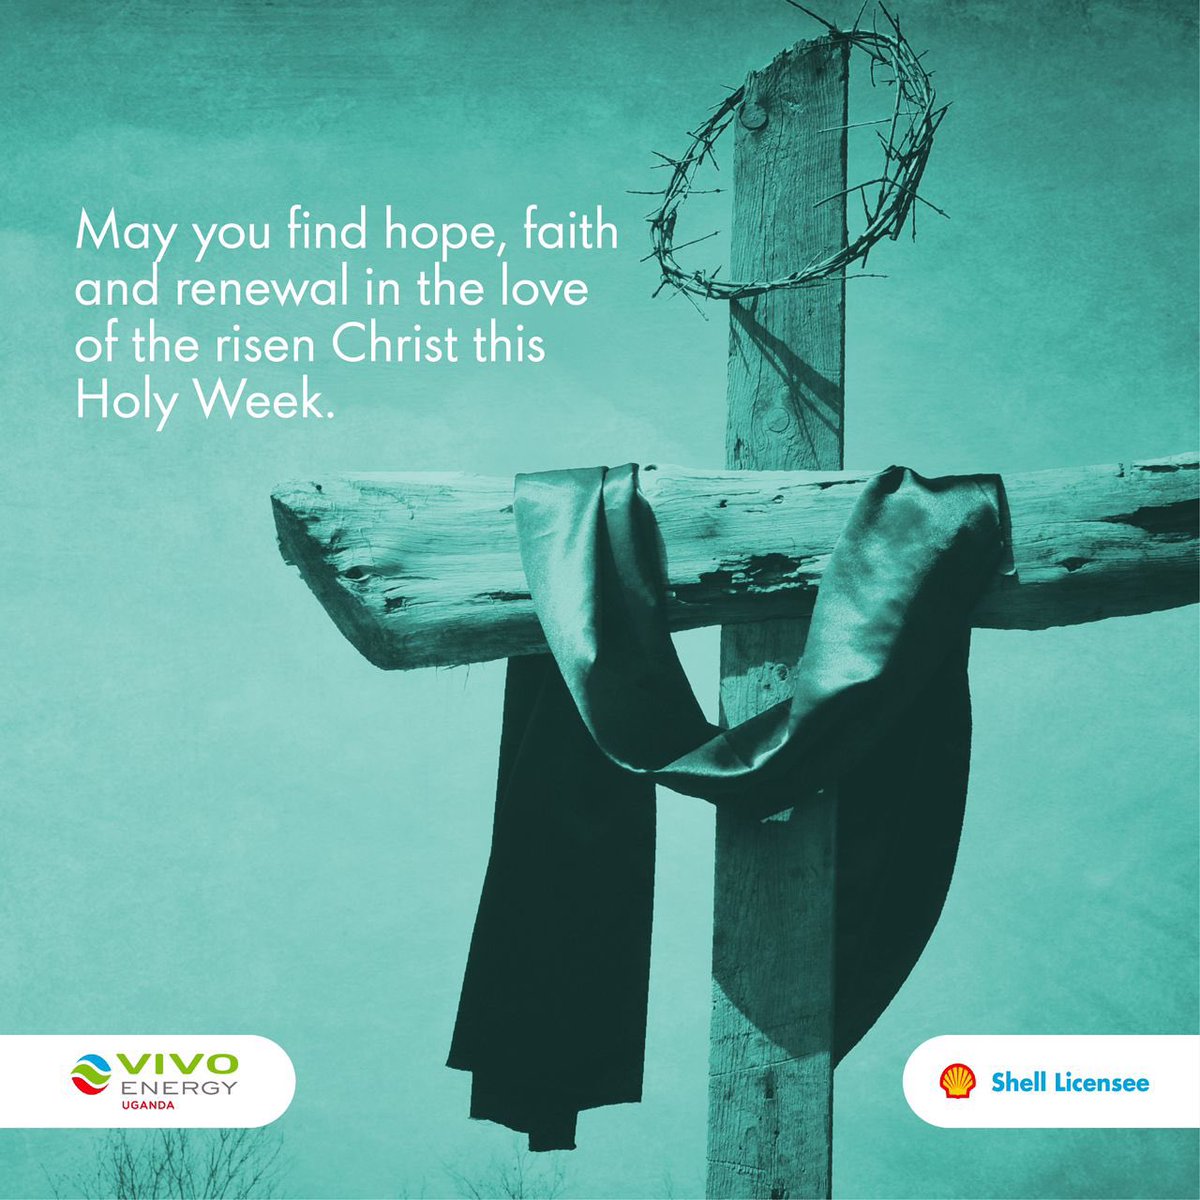 Wishing you a #GoodFriday & a great Easter ahead. May you take time to reflect on the blessings in your life and look forward to new beginnings. #VivoEnergyUganda